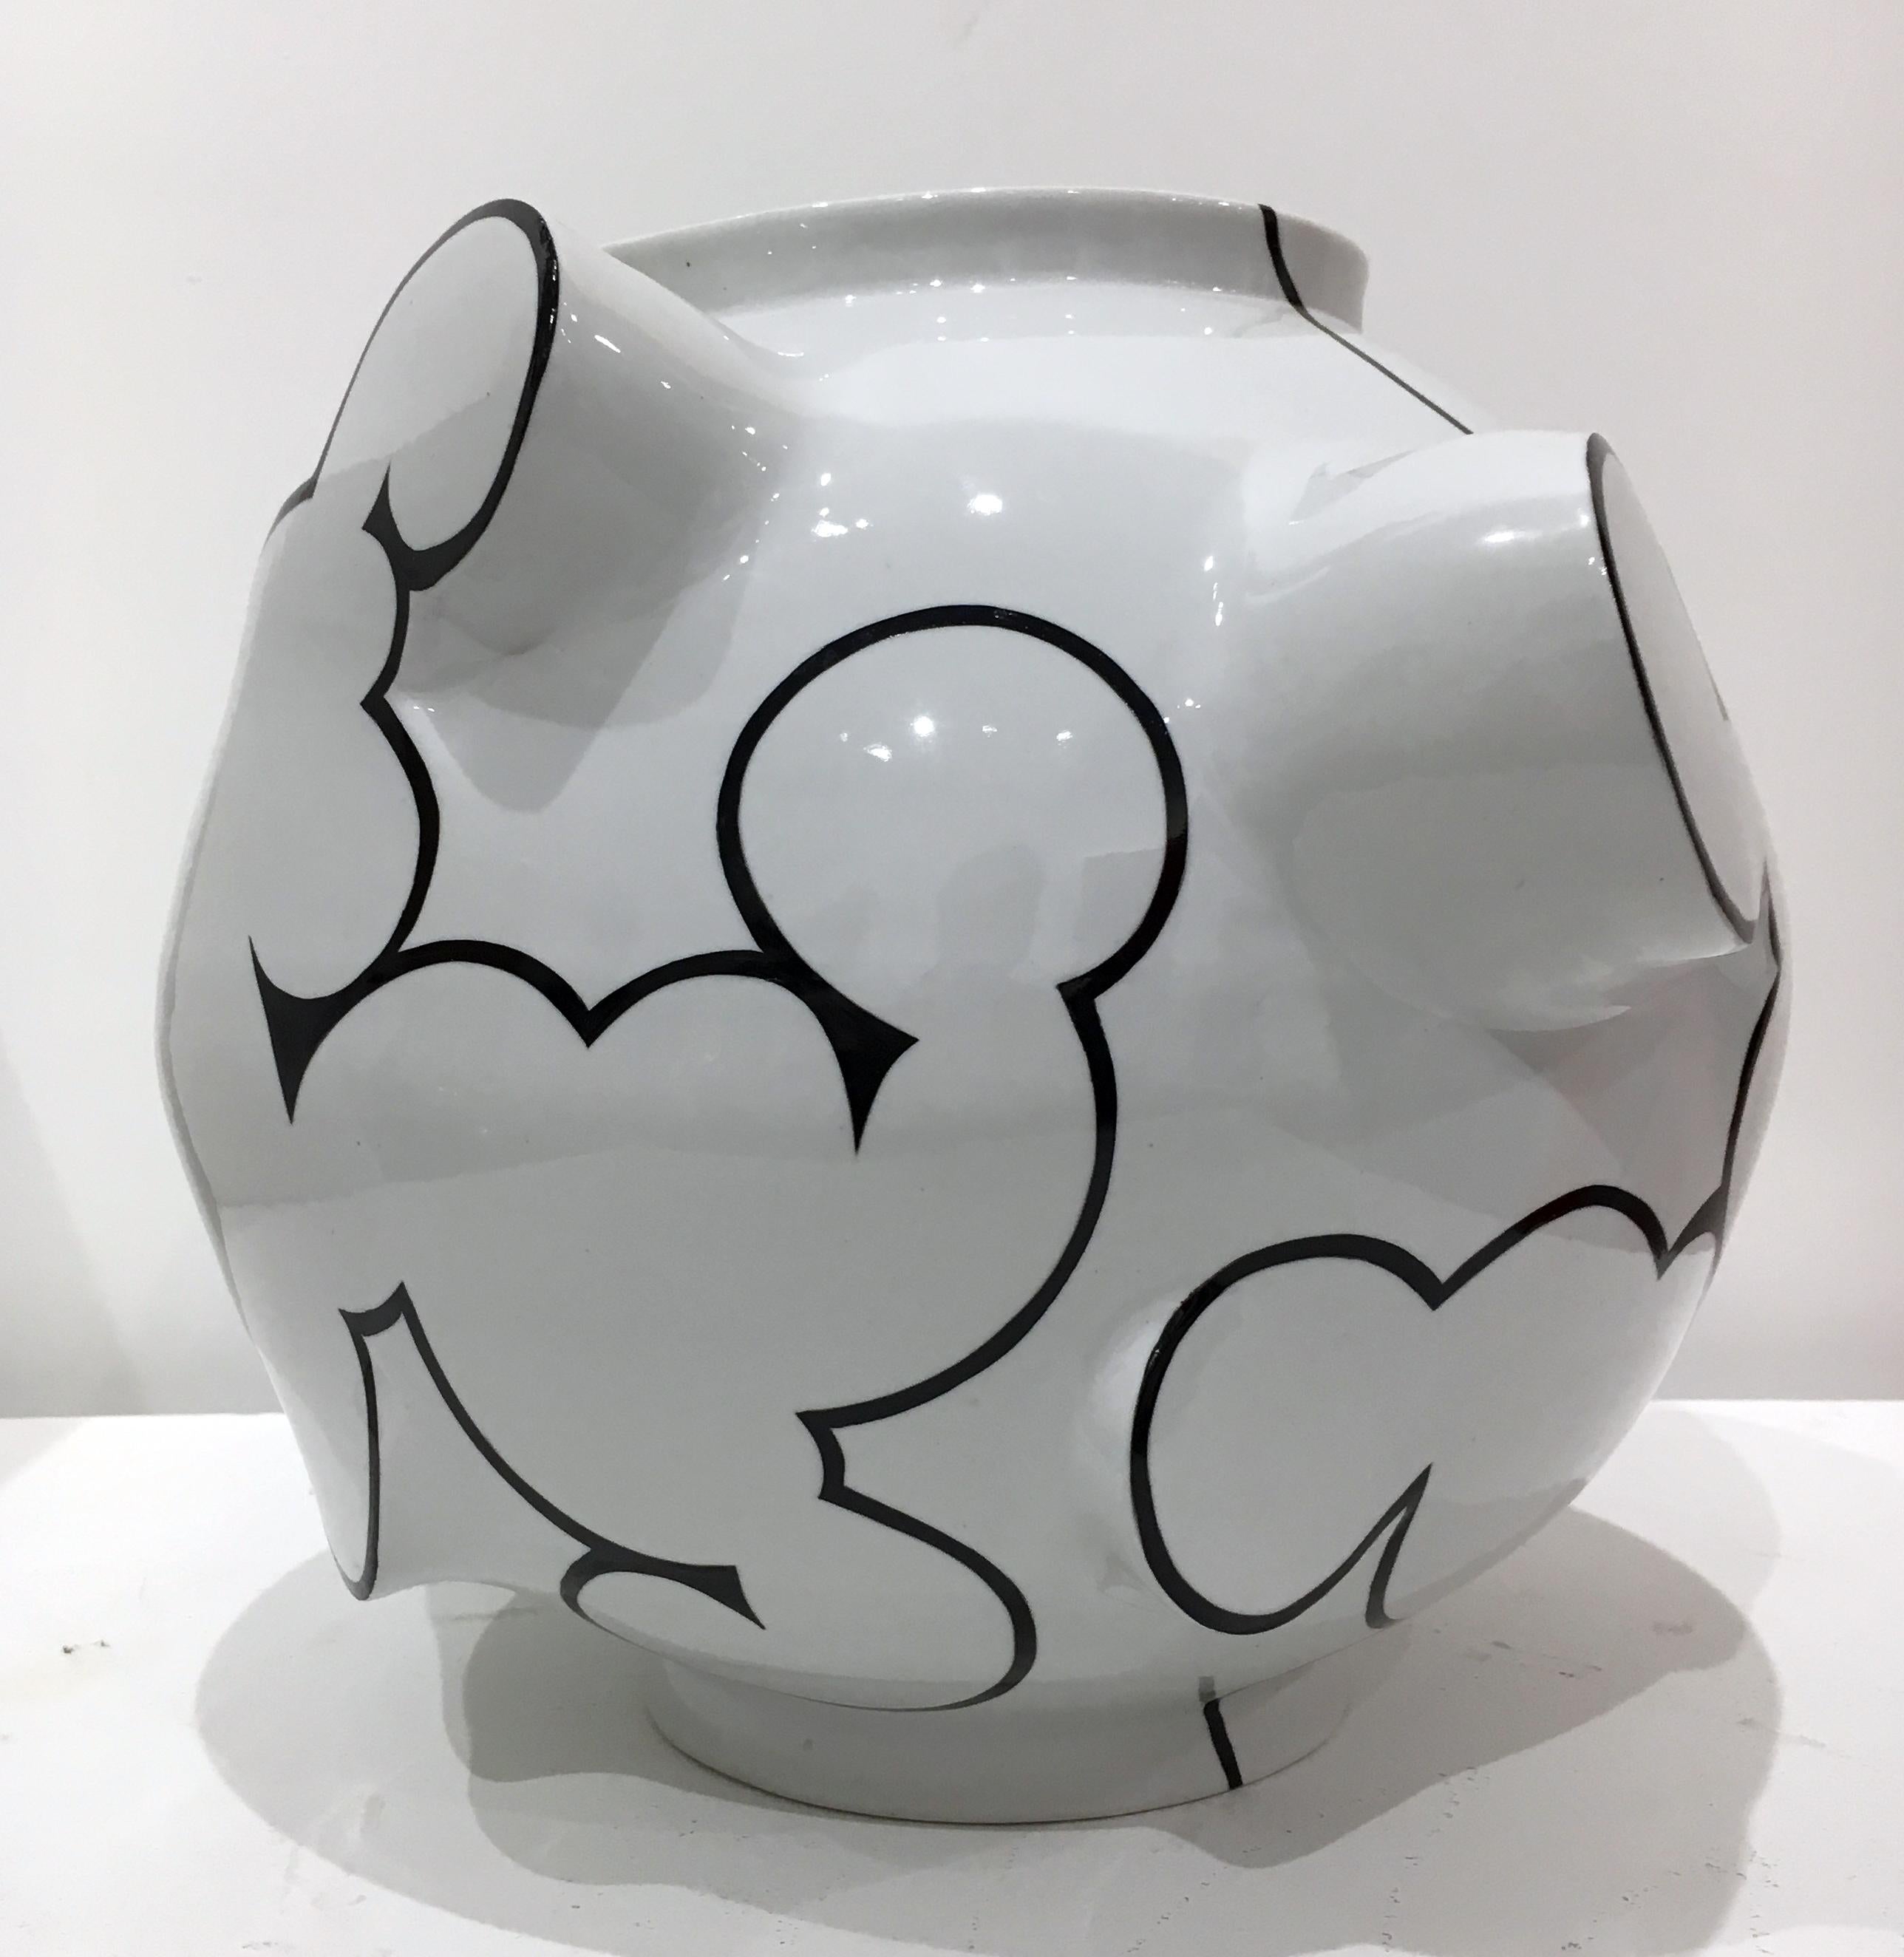 Cloud Moon Jar, Contemporary Ceramic Porcelain Sculpture with Glaze, China Paint - Gray Abstract Sculpture by Sam Chung